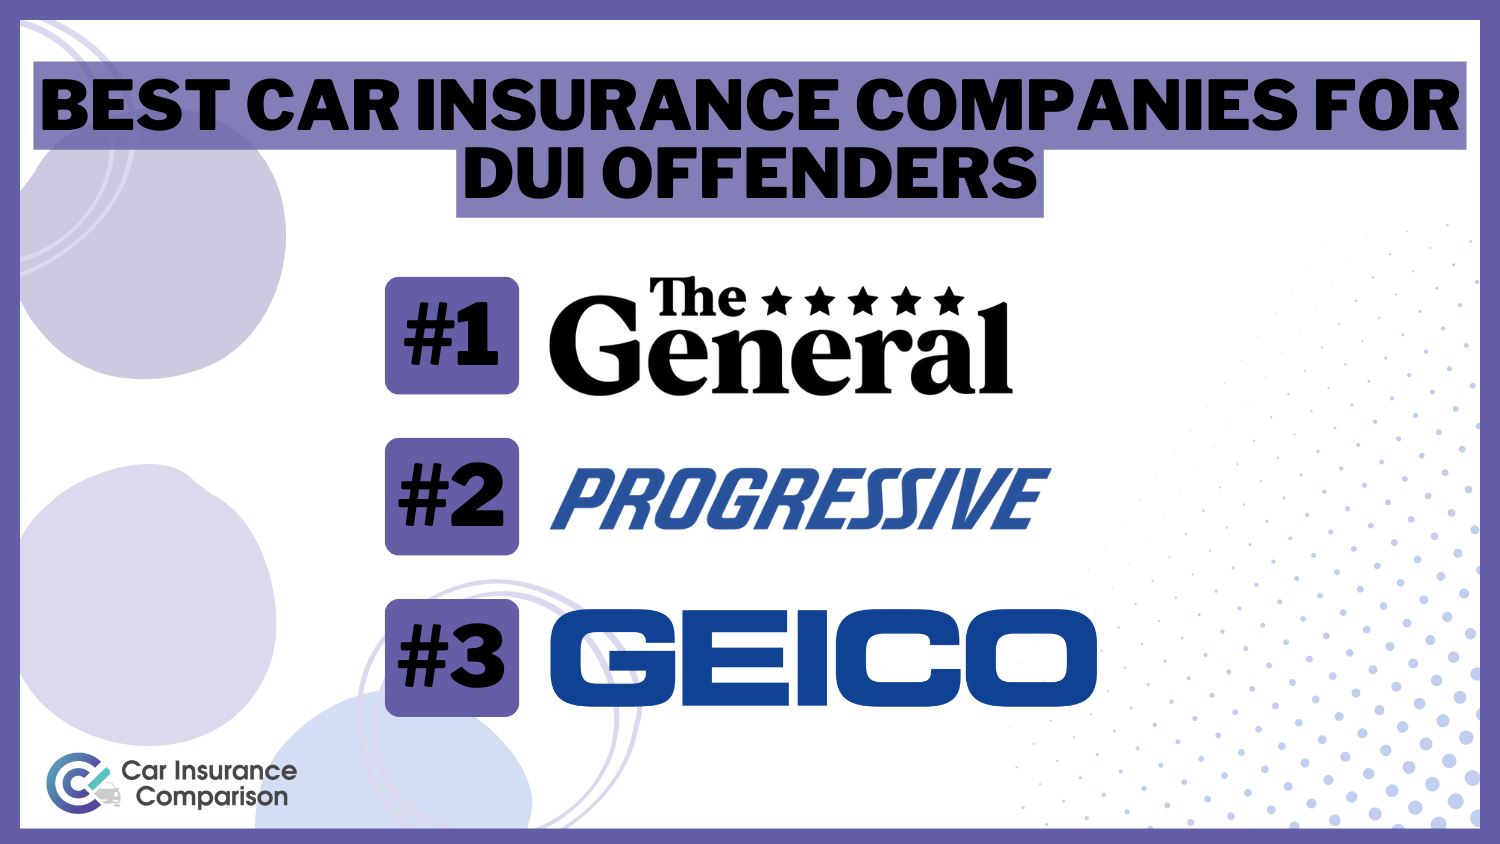 Best Car Insurance Companies for DUI Offenders - The General, Progressive, Geico